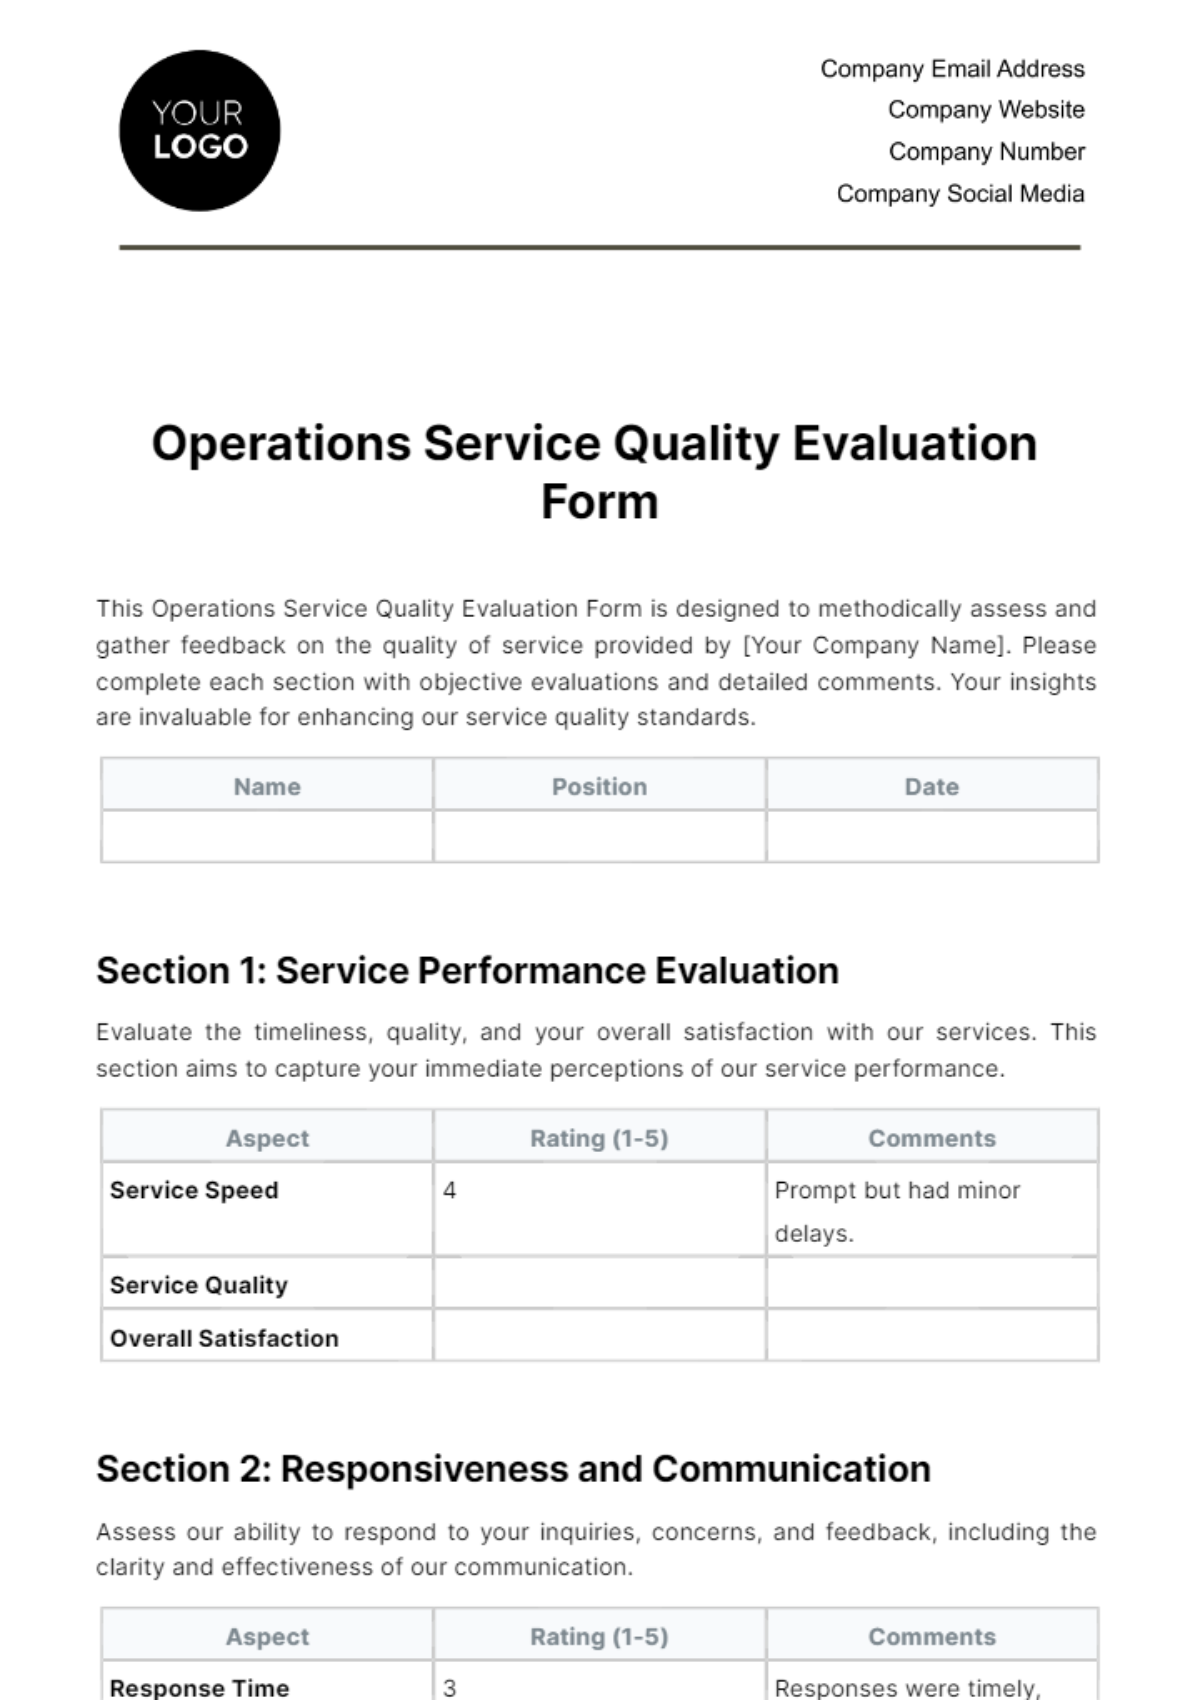 Free Operations Service Quality Evaluation Form Template